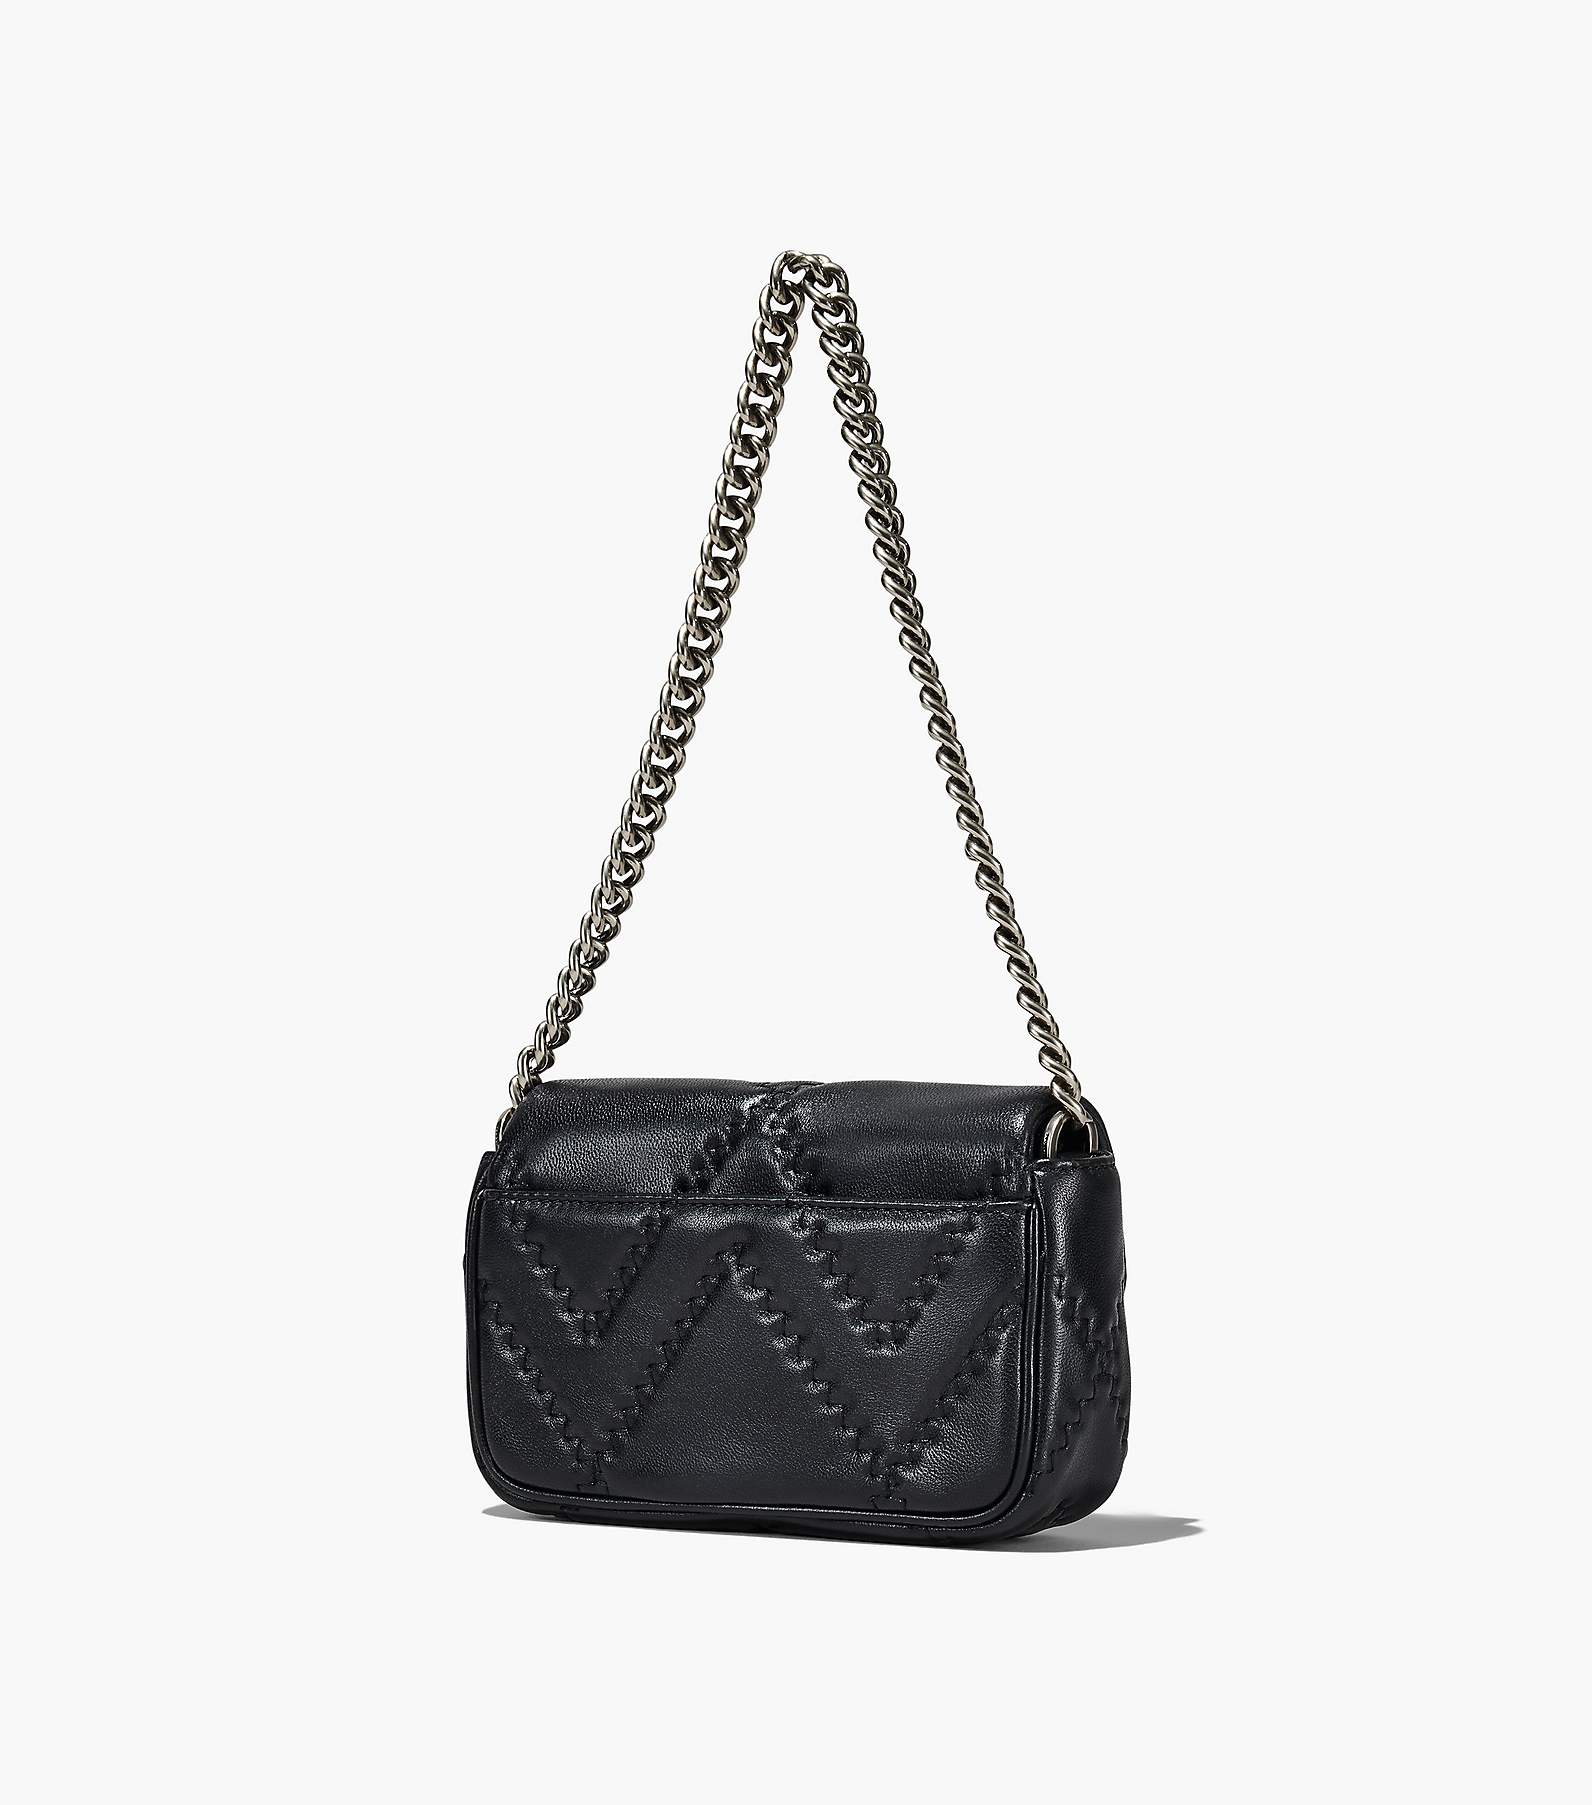 Quilted Black Purse for Women Large Tote Duffle Shoulder Bag Y2K Crossbody Clutch Handbag with Chain Strap for Work Travel